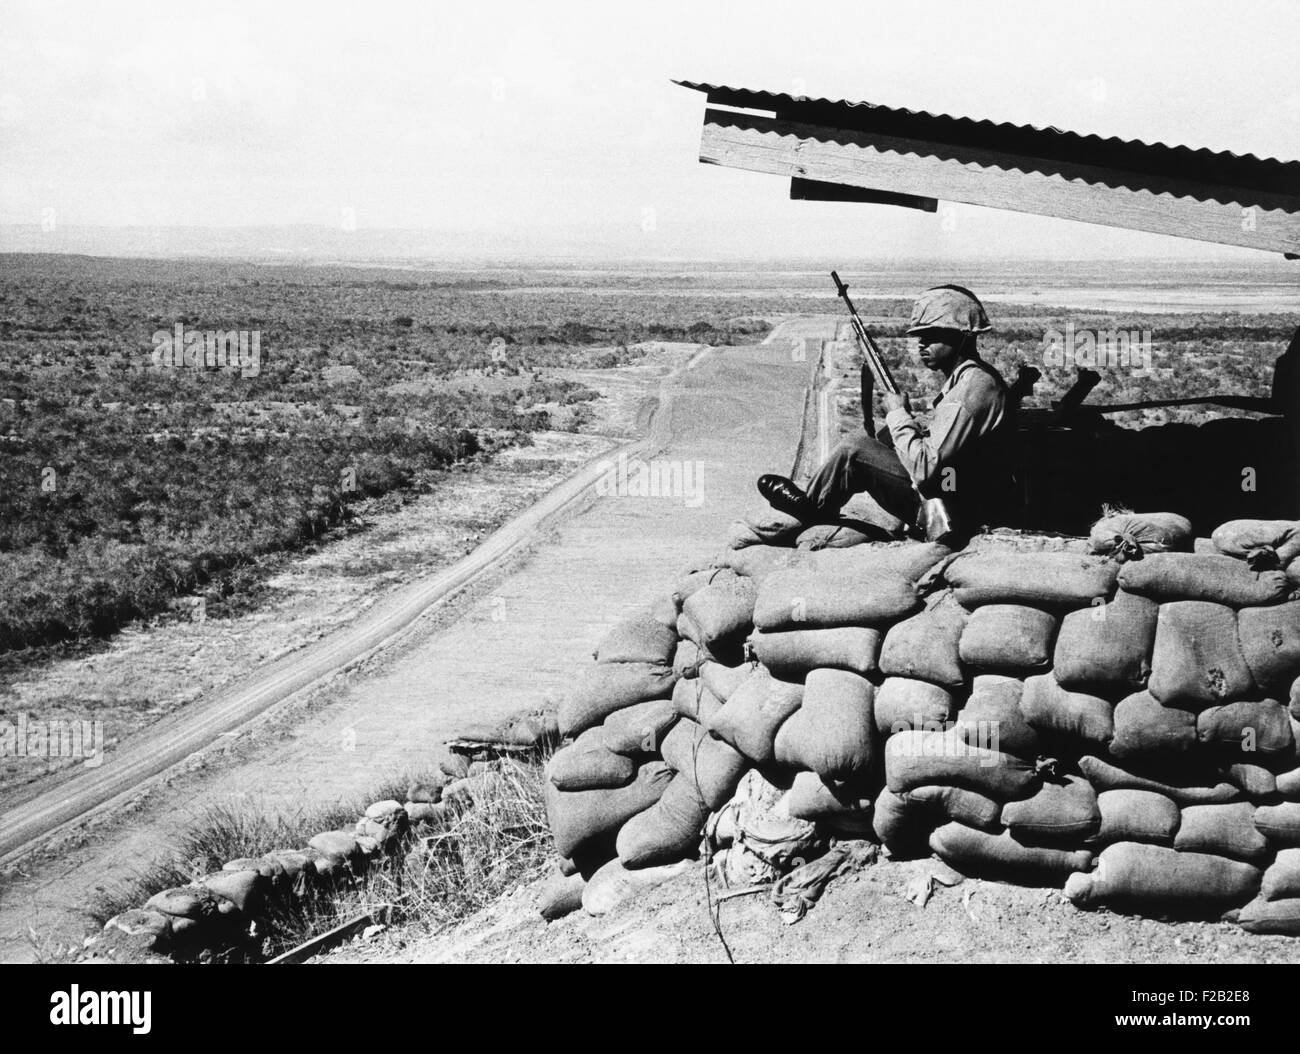 U.S. Marine, looks across into Communist Cuba from Guantanamo Naval Base Cuba. Feb. 16, 1964. The U.S. has occupied the area since it was captured from Spain in the Battle of Guantanamo Bay, during the Spanish American War in 1898. (CSU 2015 7 377) Stock Photo